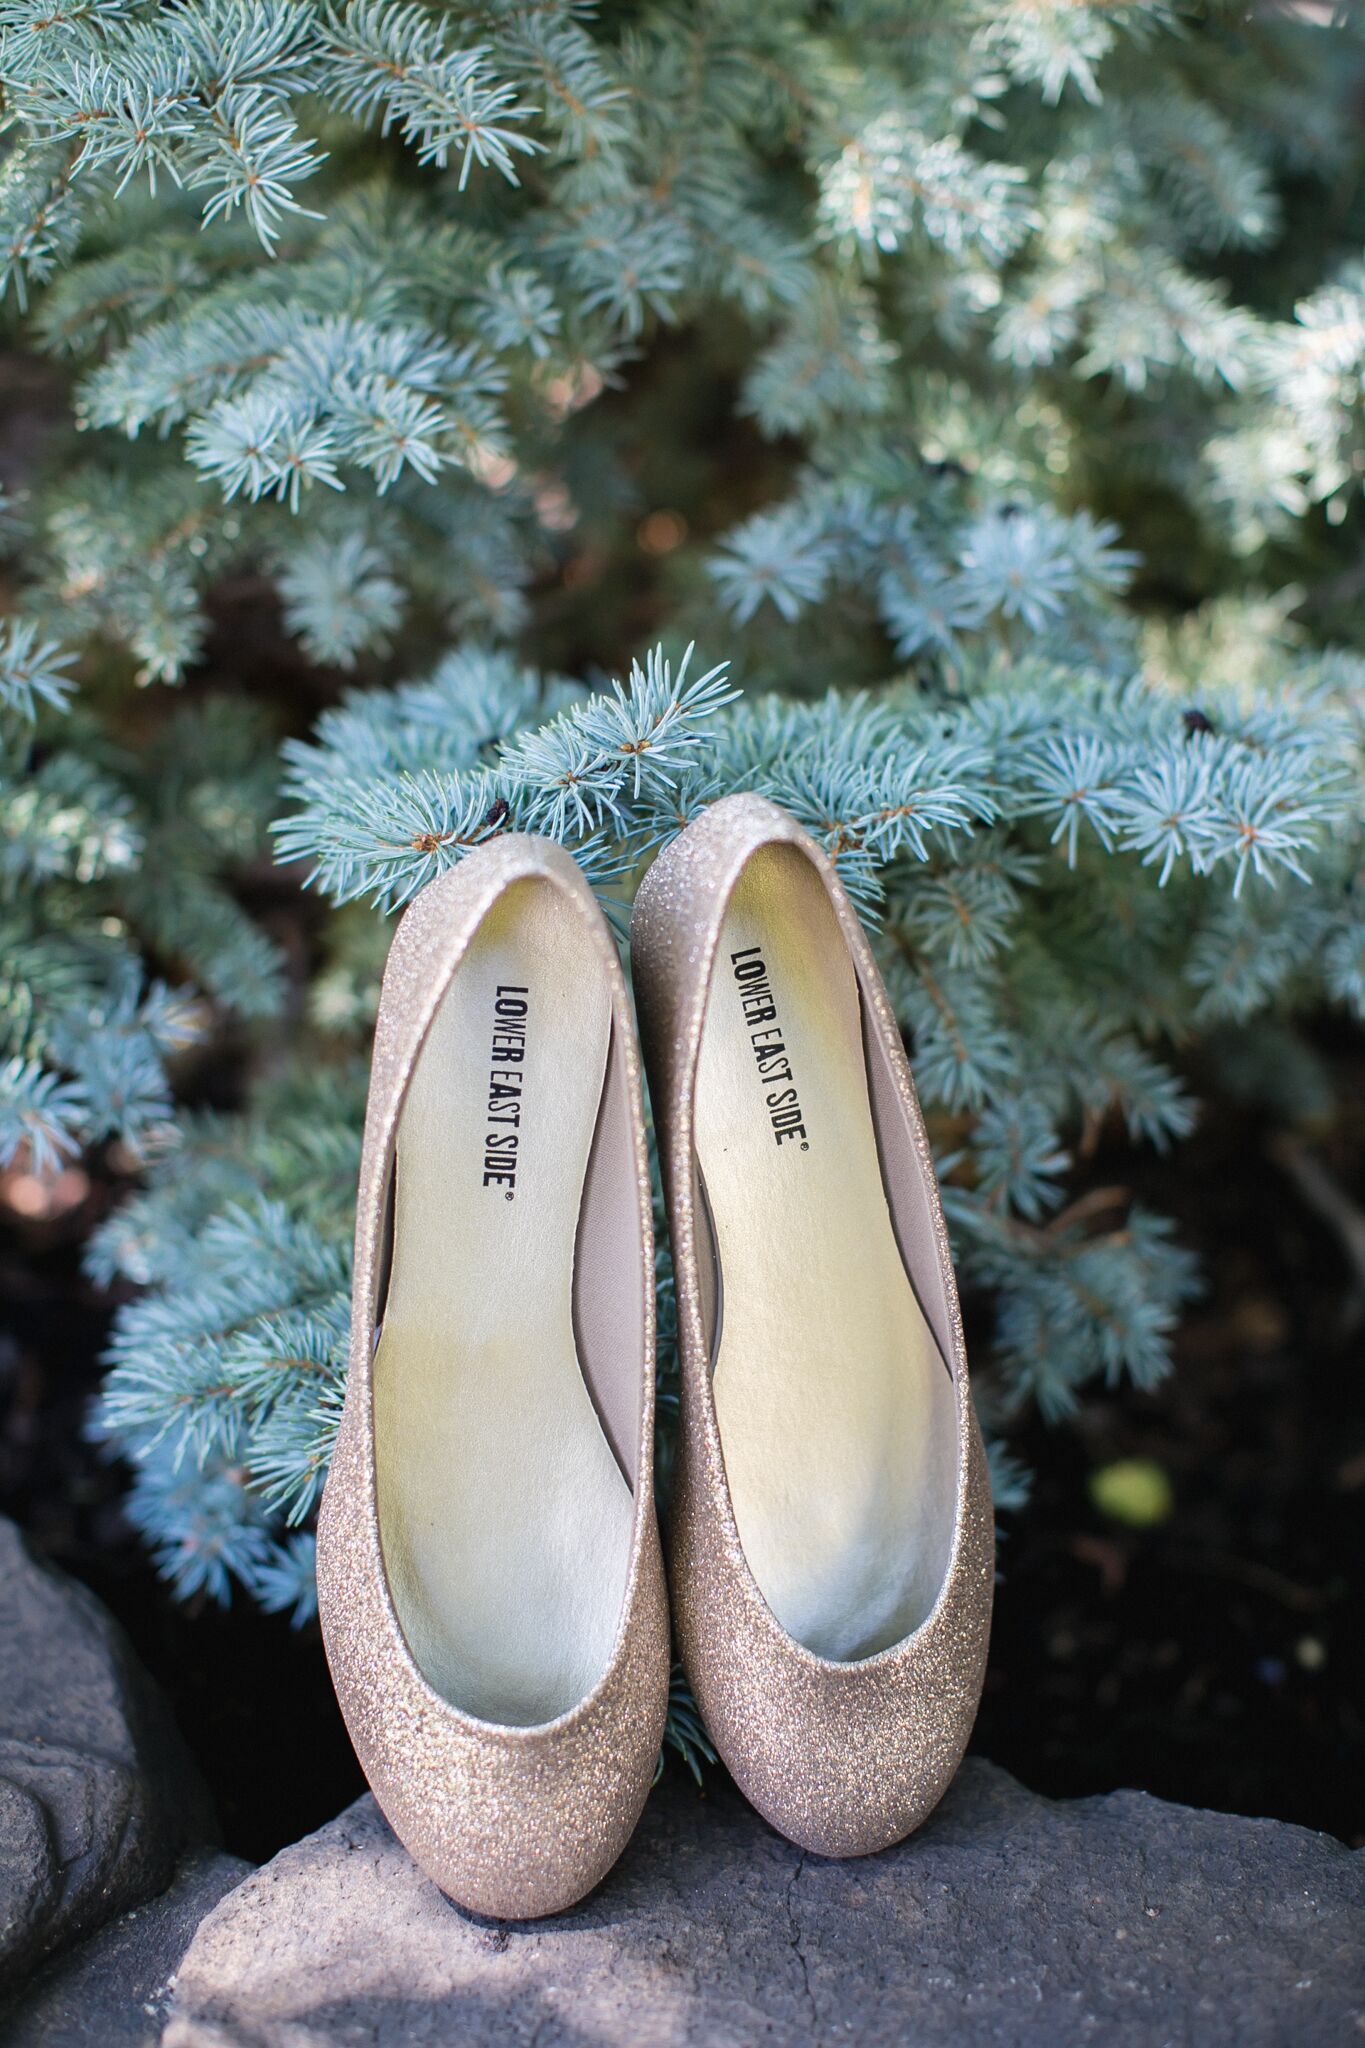 Glittery ChampagneColored Bridal Flat Shoes